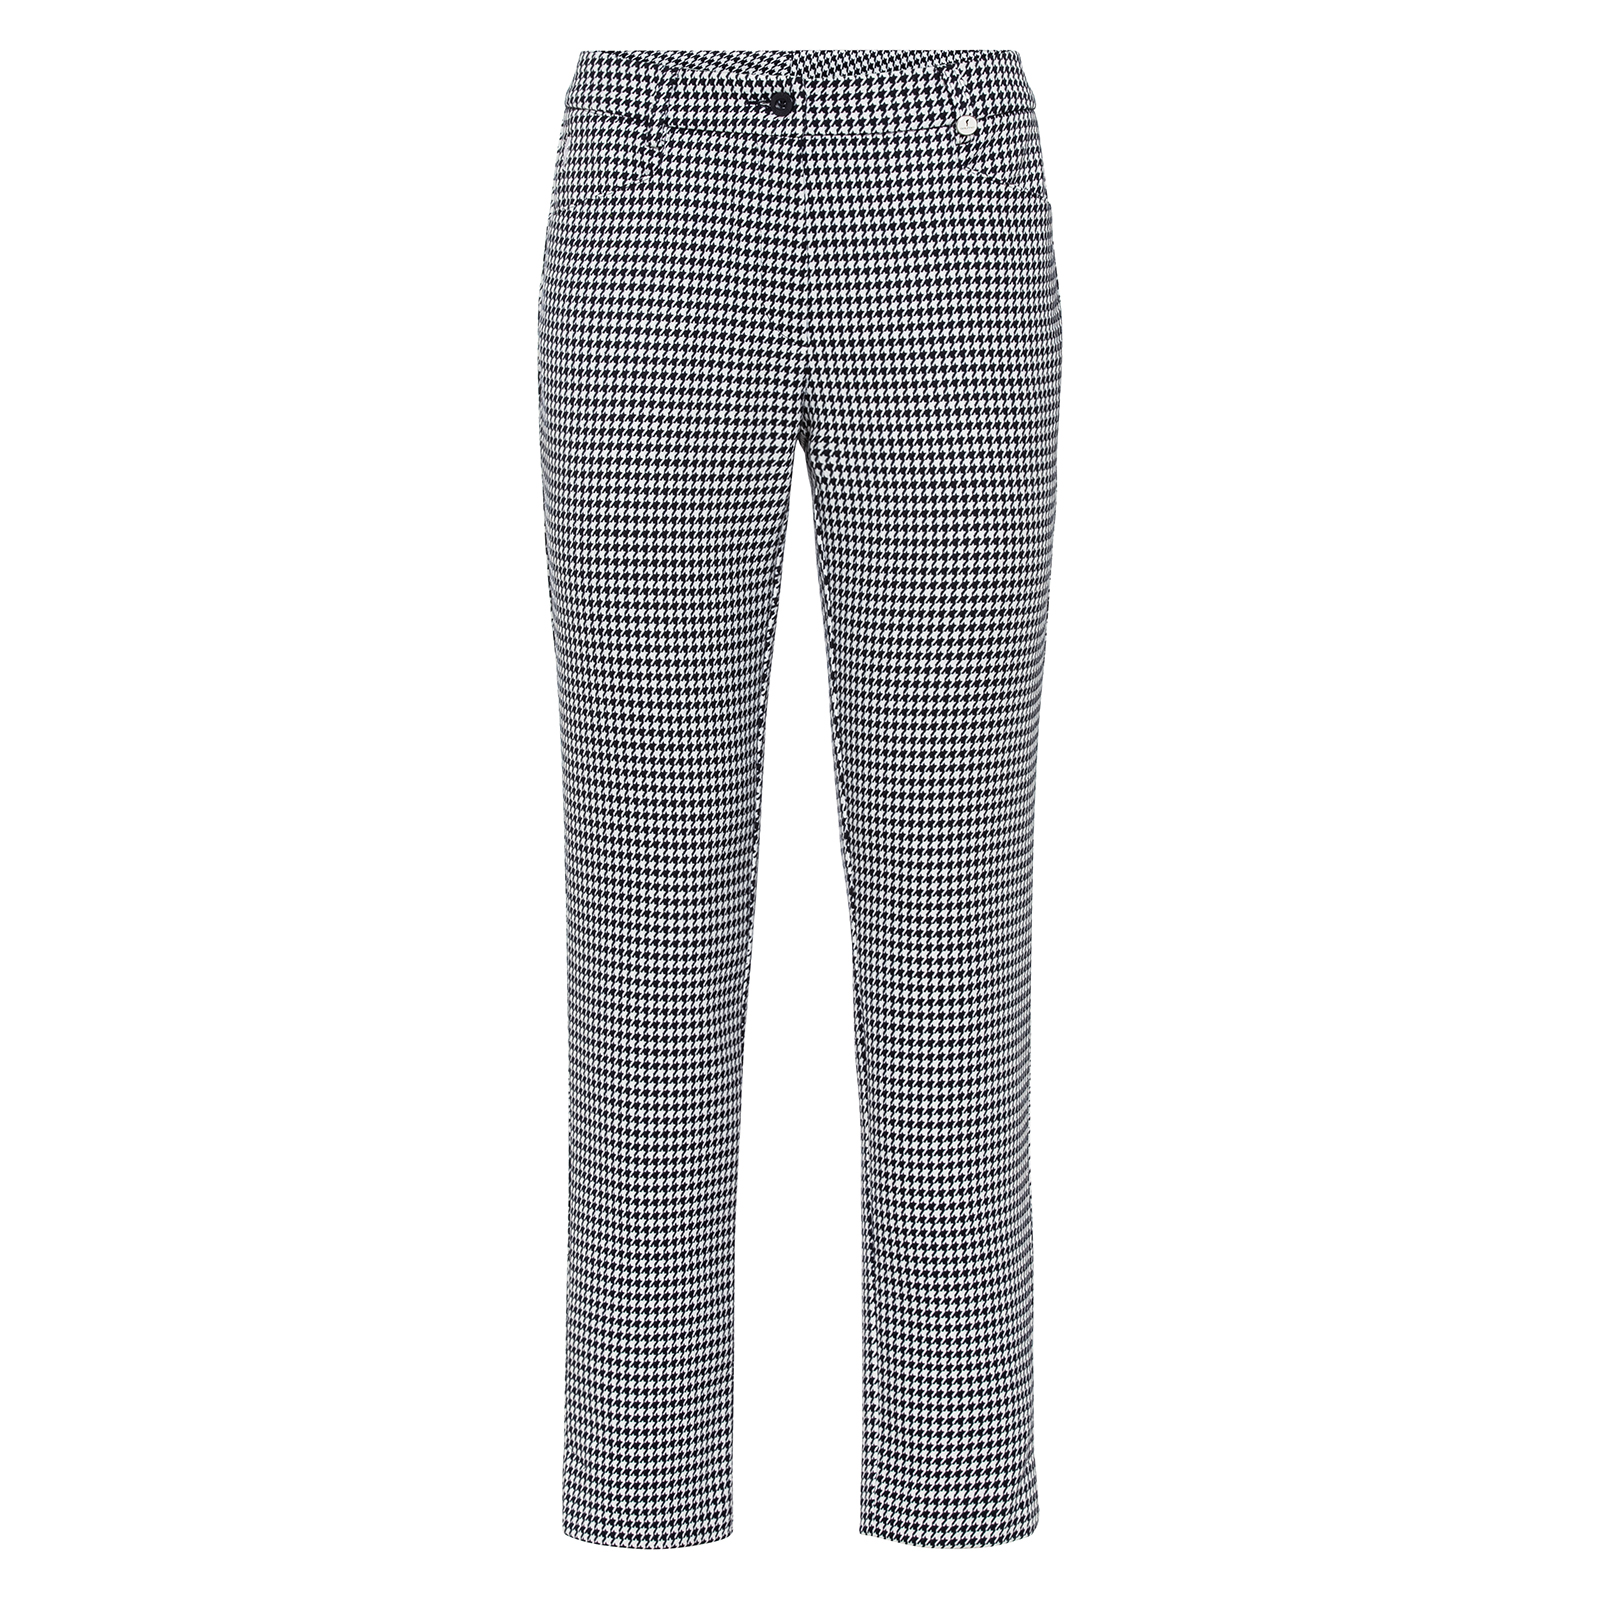 Ladies' slim fit 7/8-length houndstooth golf trousers